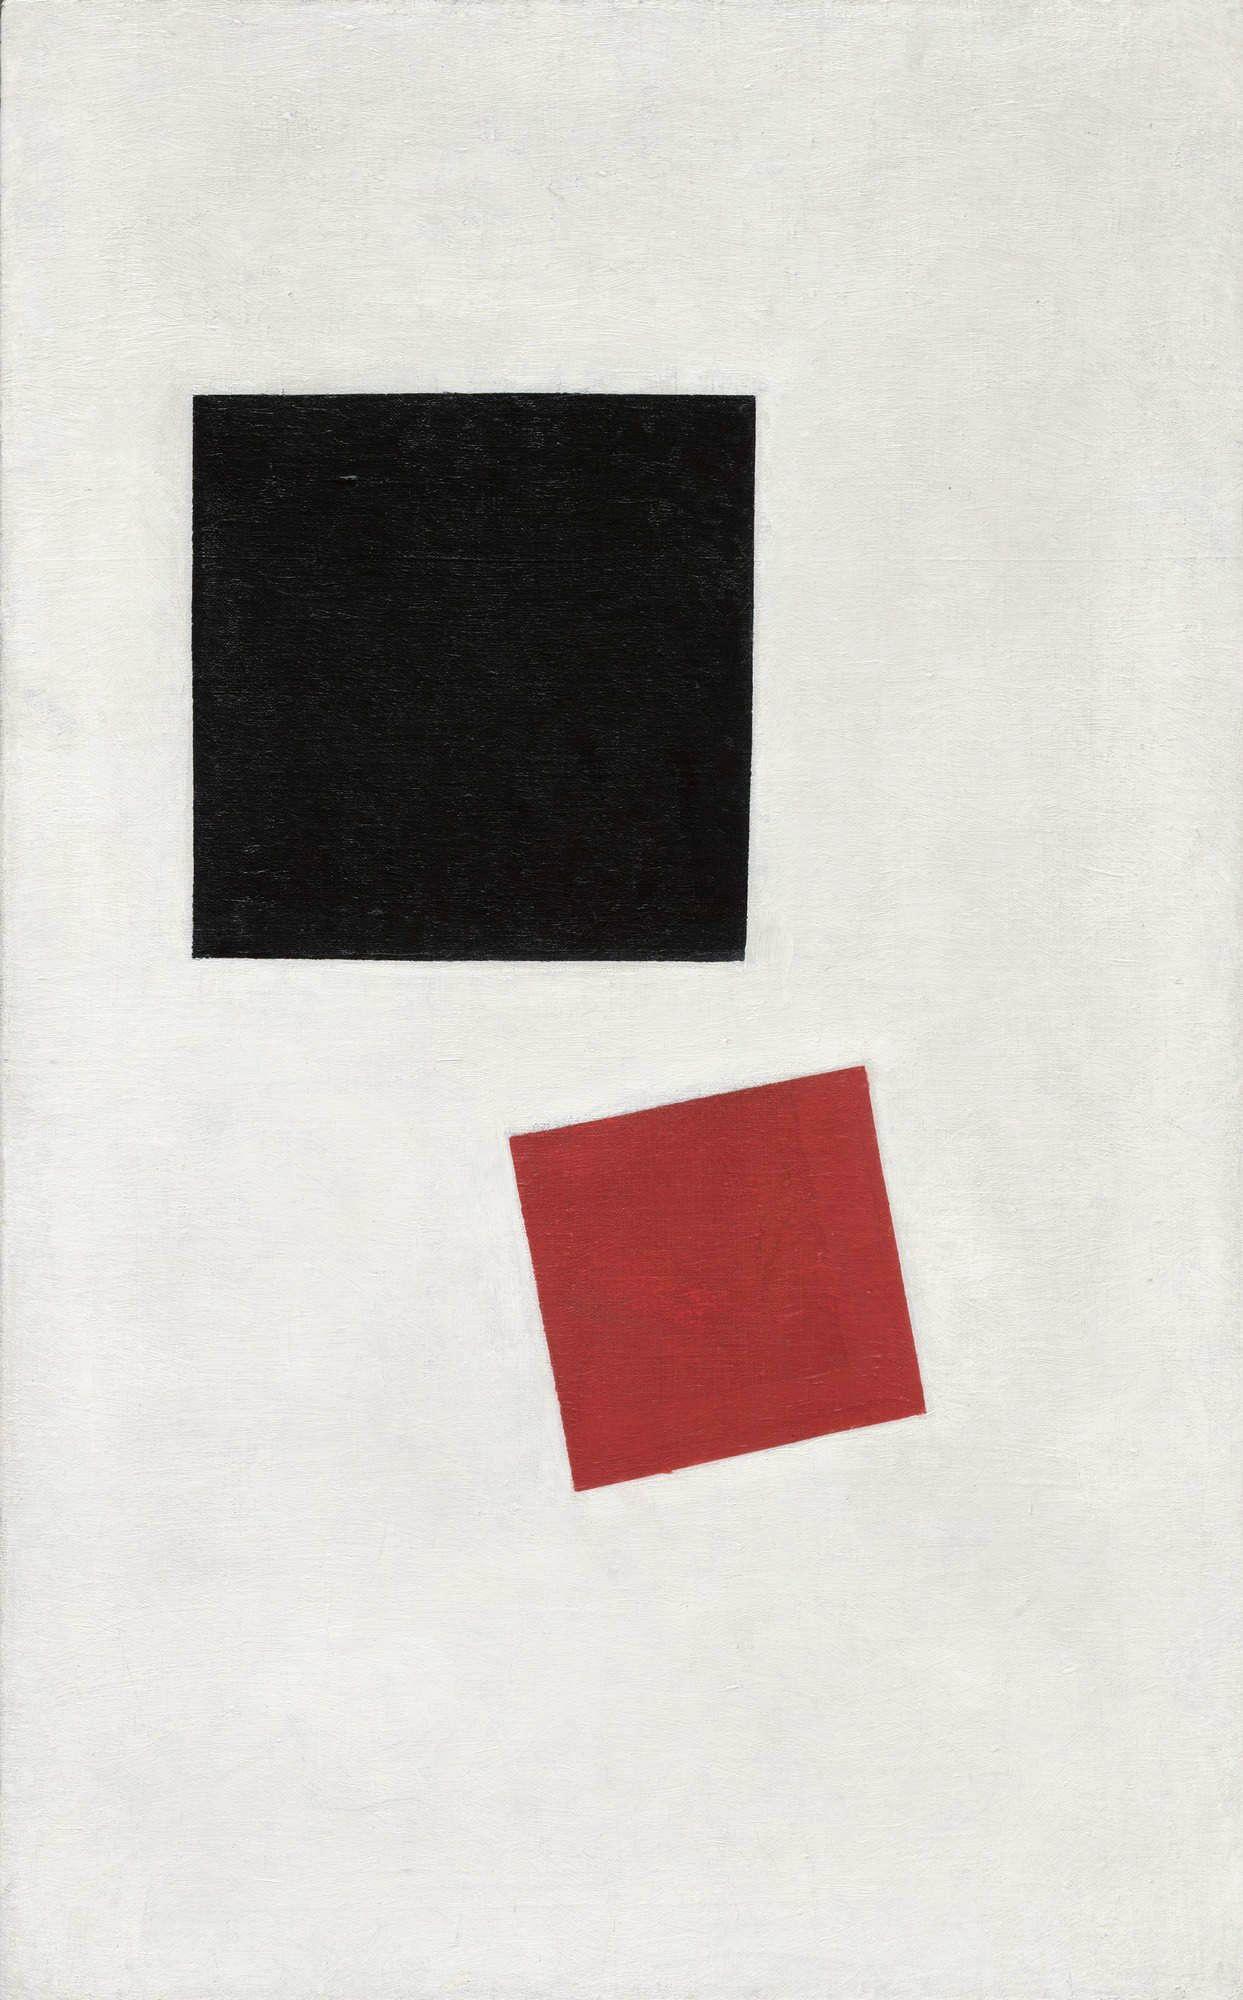 Red and Black Square Logo - Kazimir Malevich - Black Square and Red Square, 1915 | Trivium Art ...